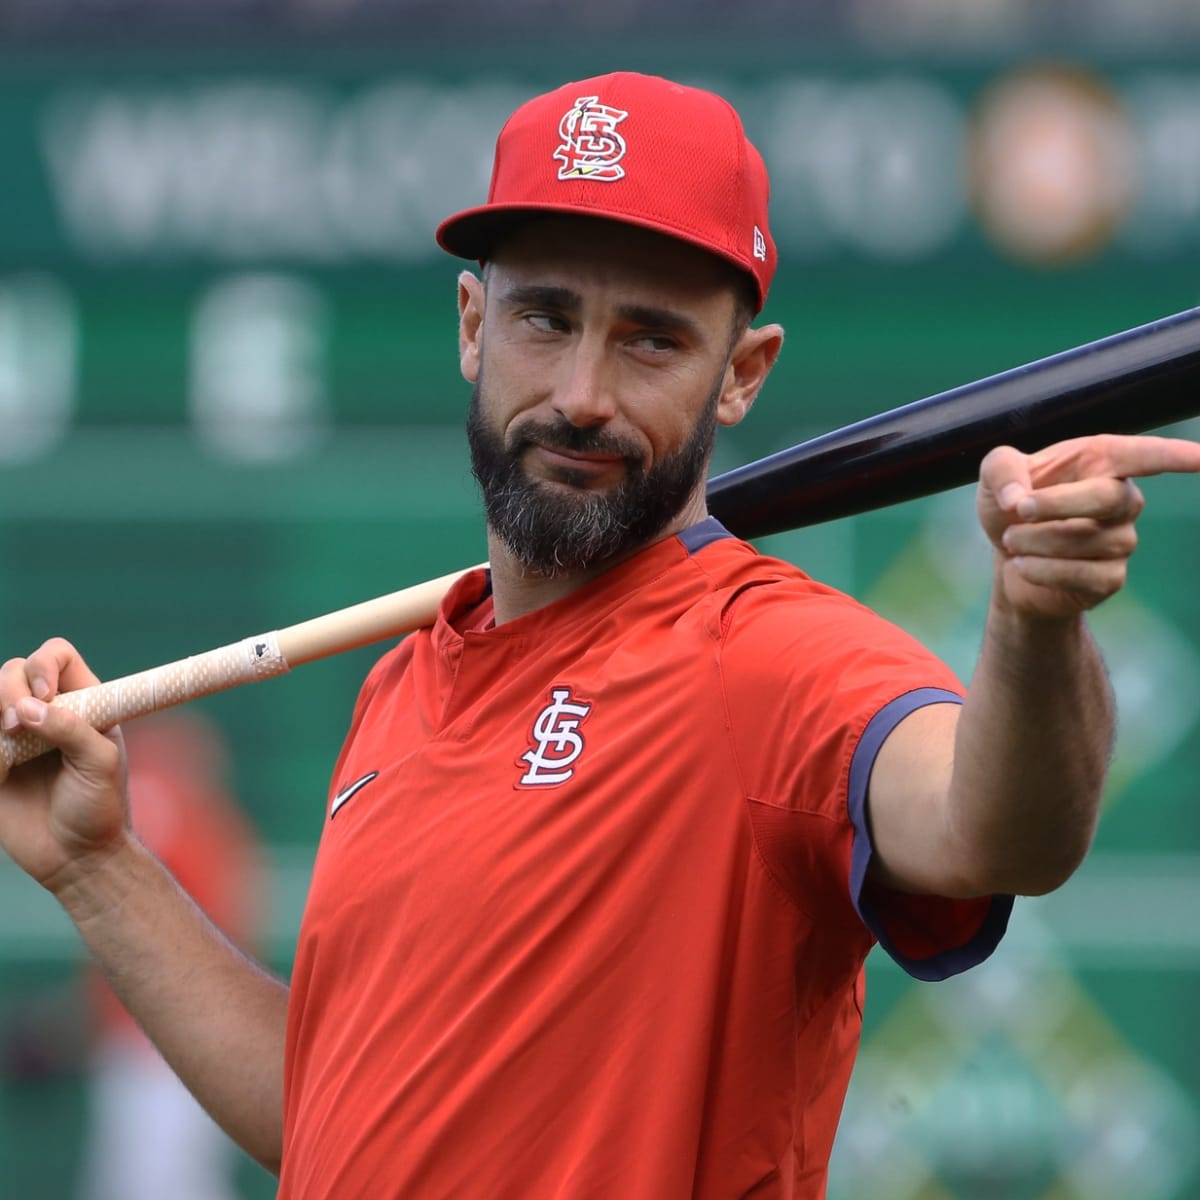 Is it just me or does Matt Carpenter of the St. Louis Cardinals